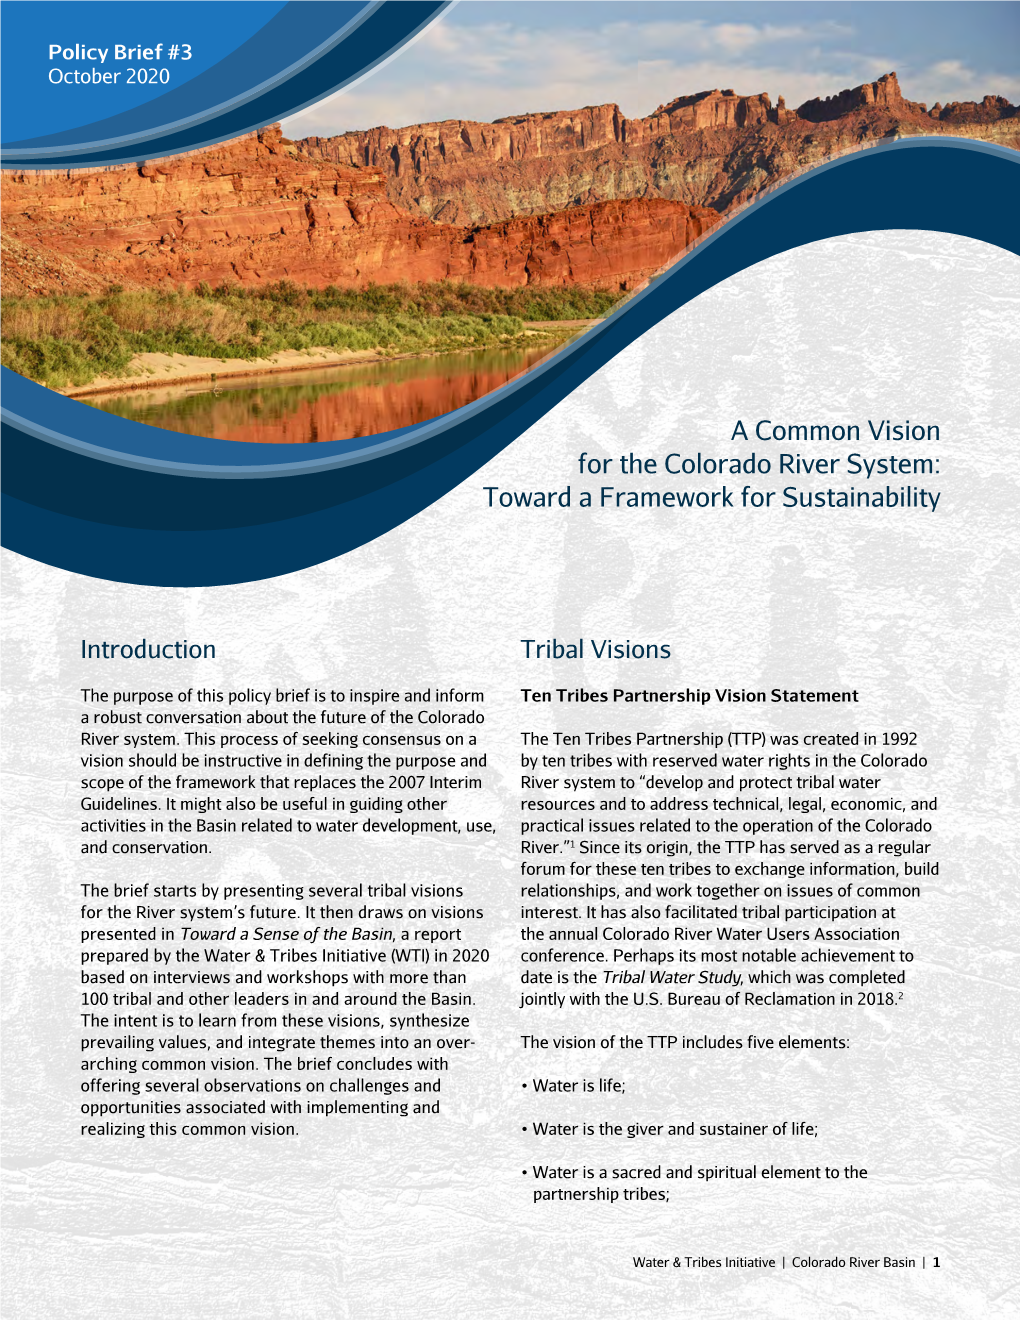 A Common Vision for the Colorado River System: Toward a Framework for Sustainability